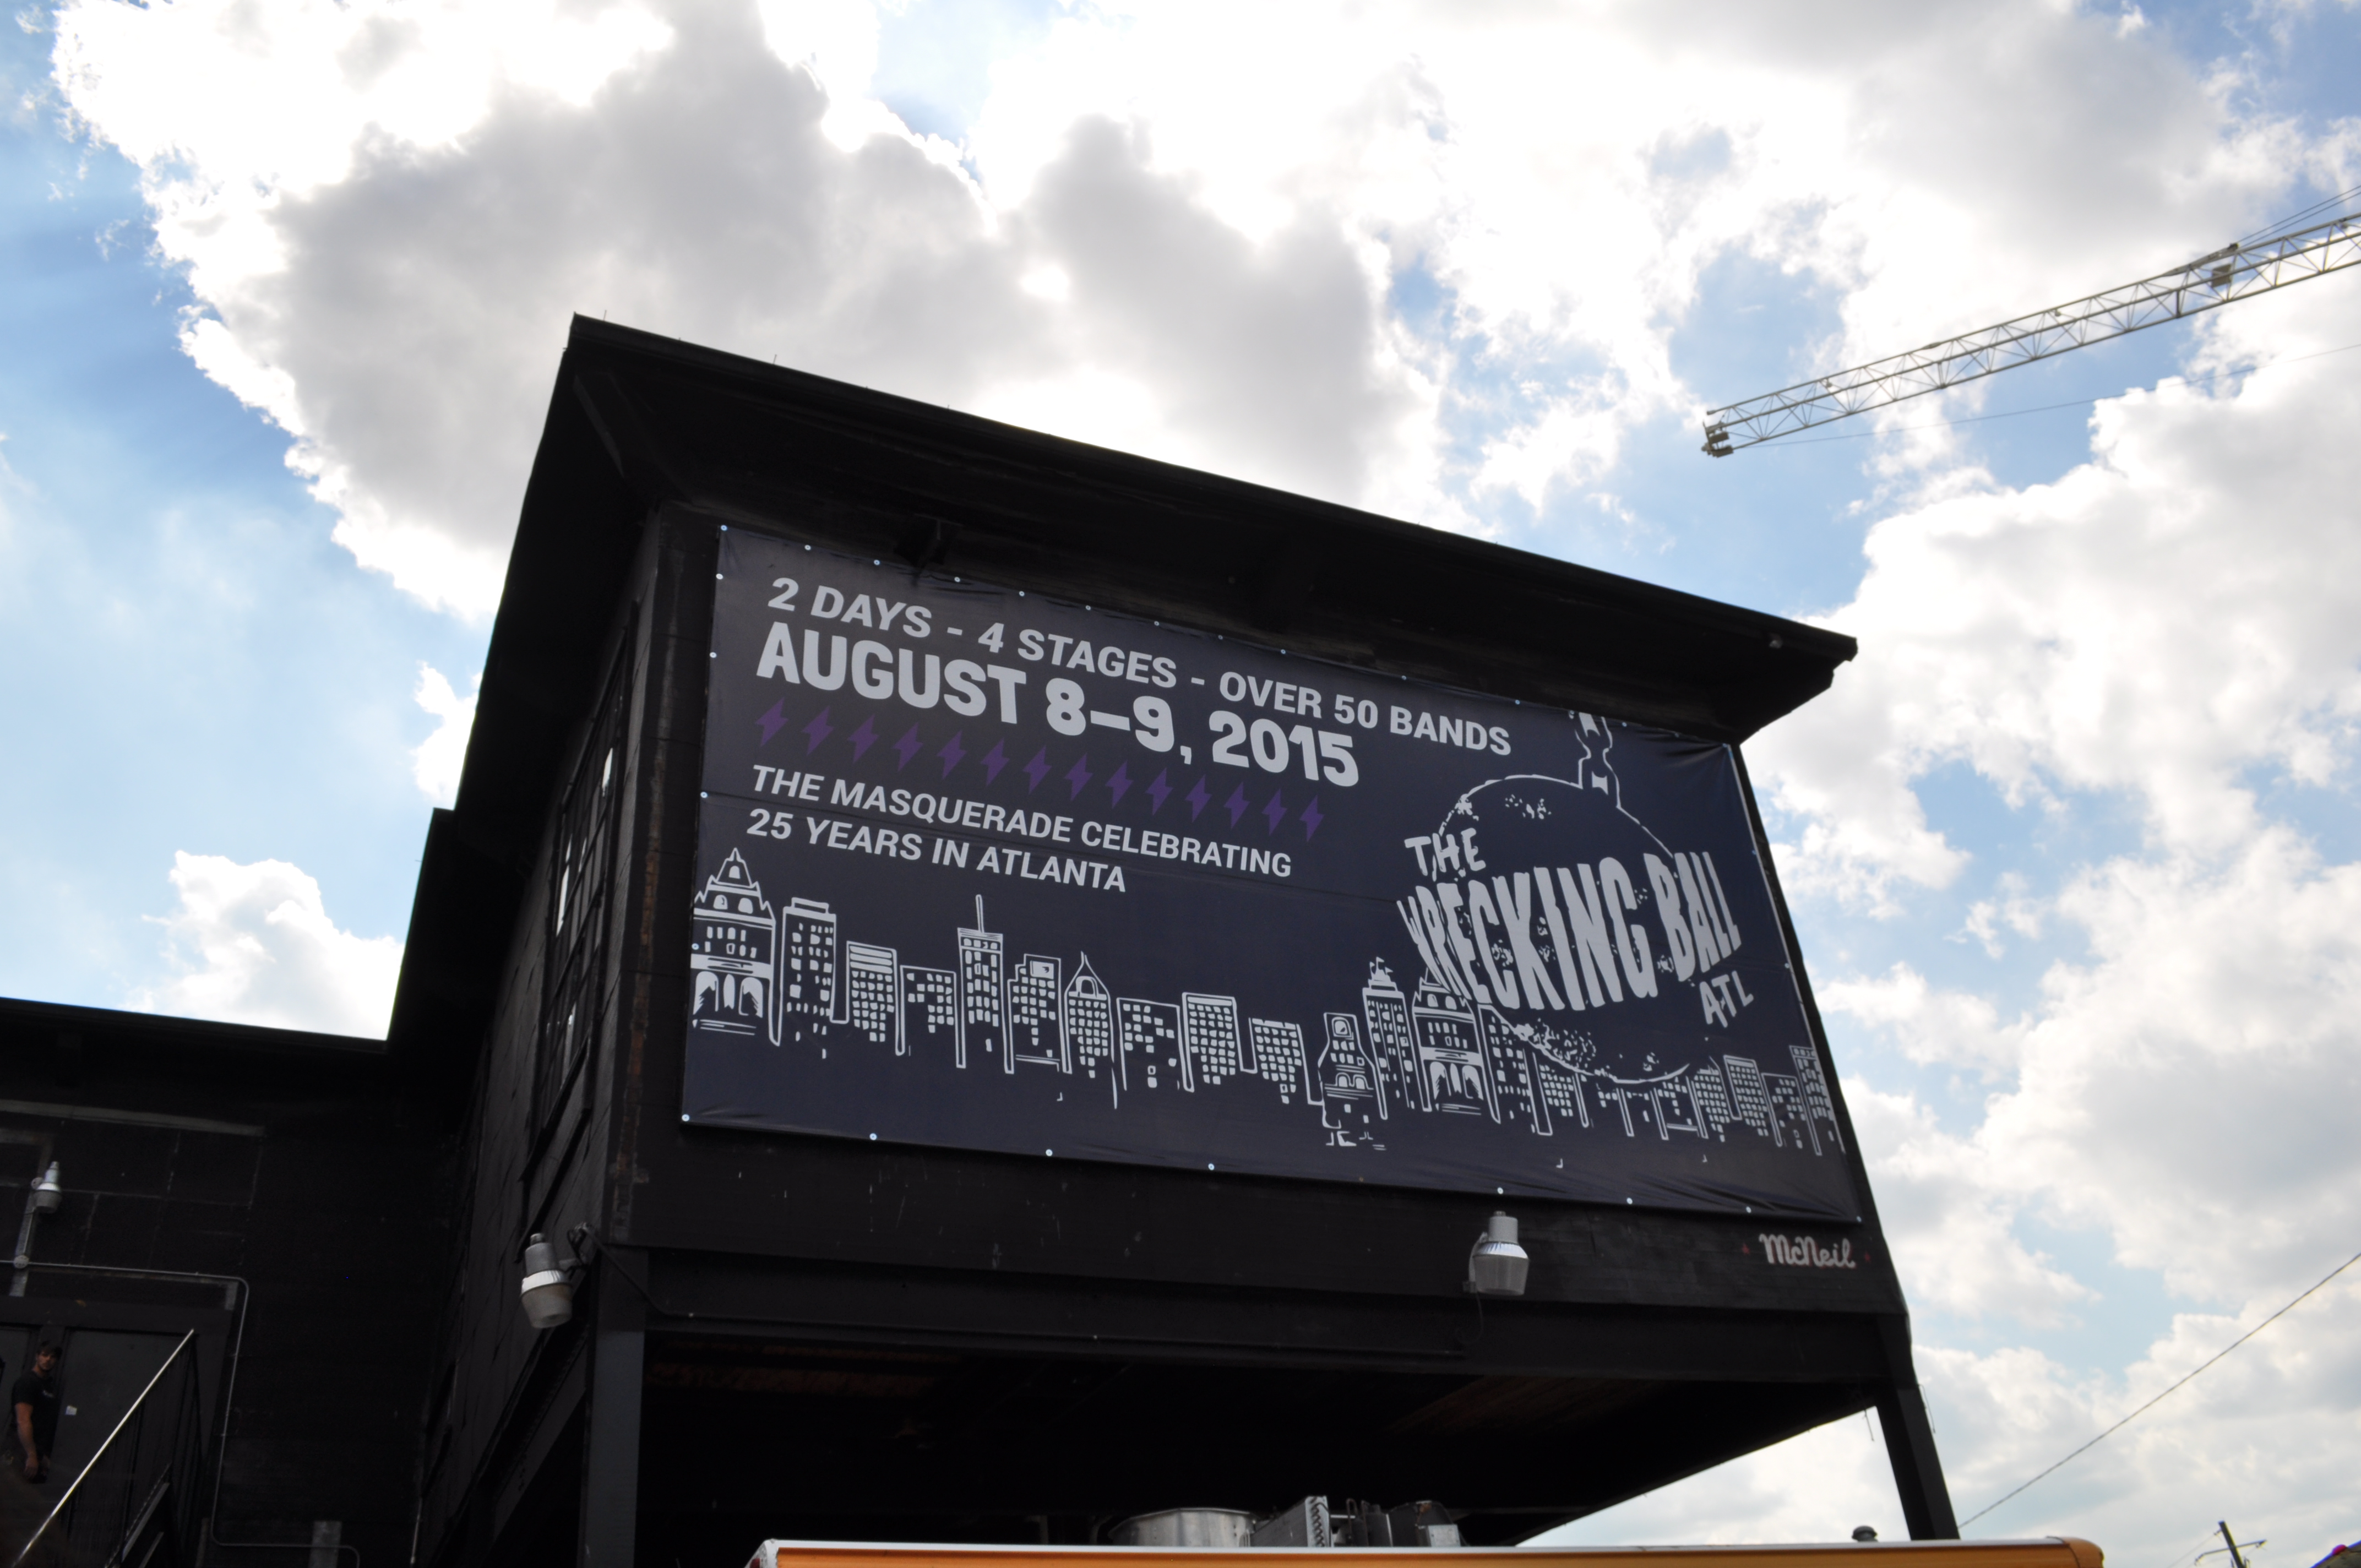 The Masquerade’s billboard hung over the heads of concert goers who watched bands perform on the Purgatory stage.